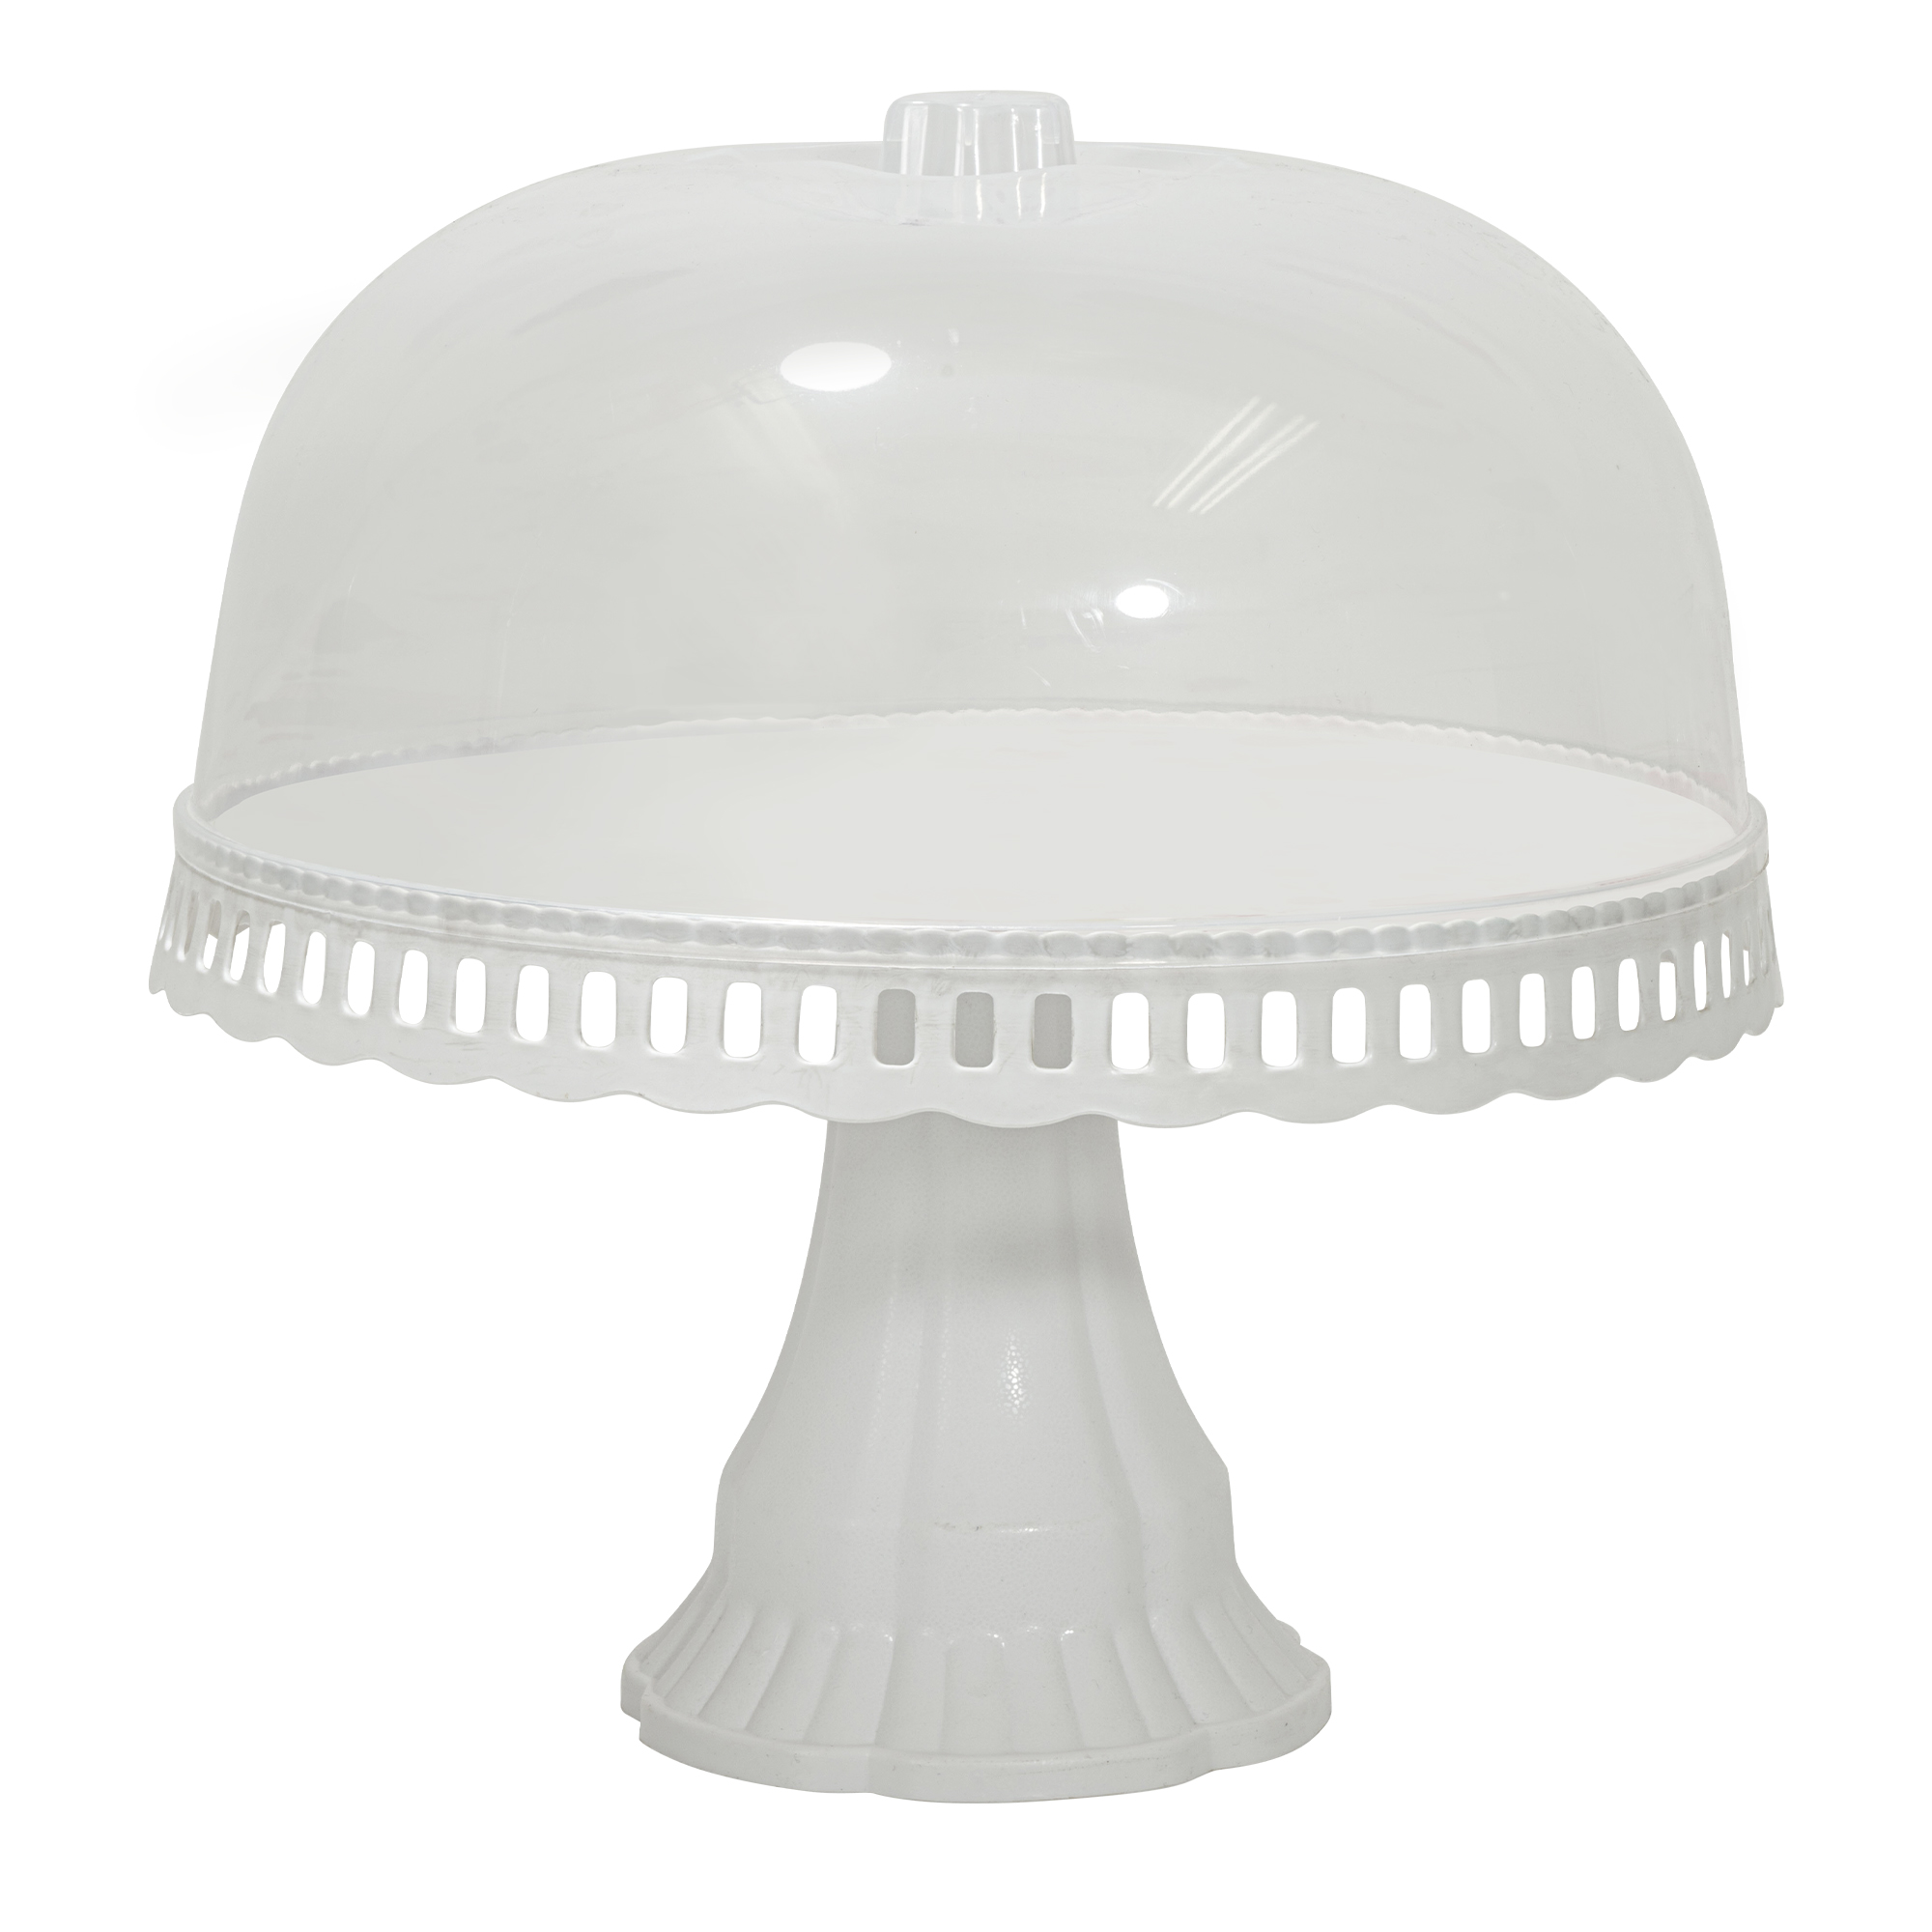 Plastic Cake Stand With Dome Lid - White